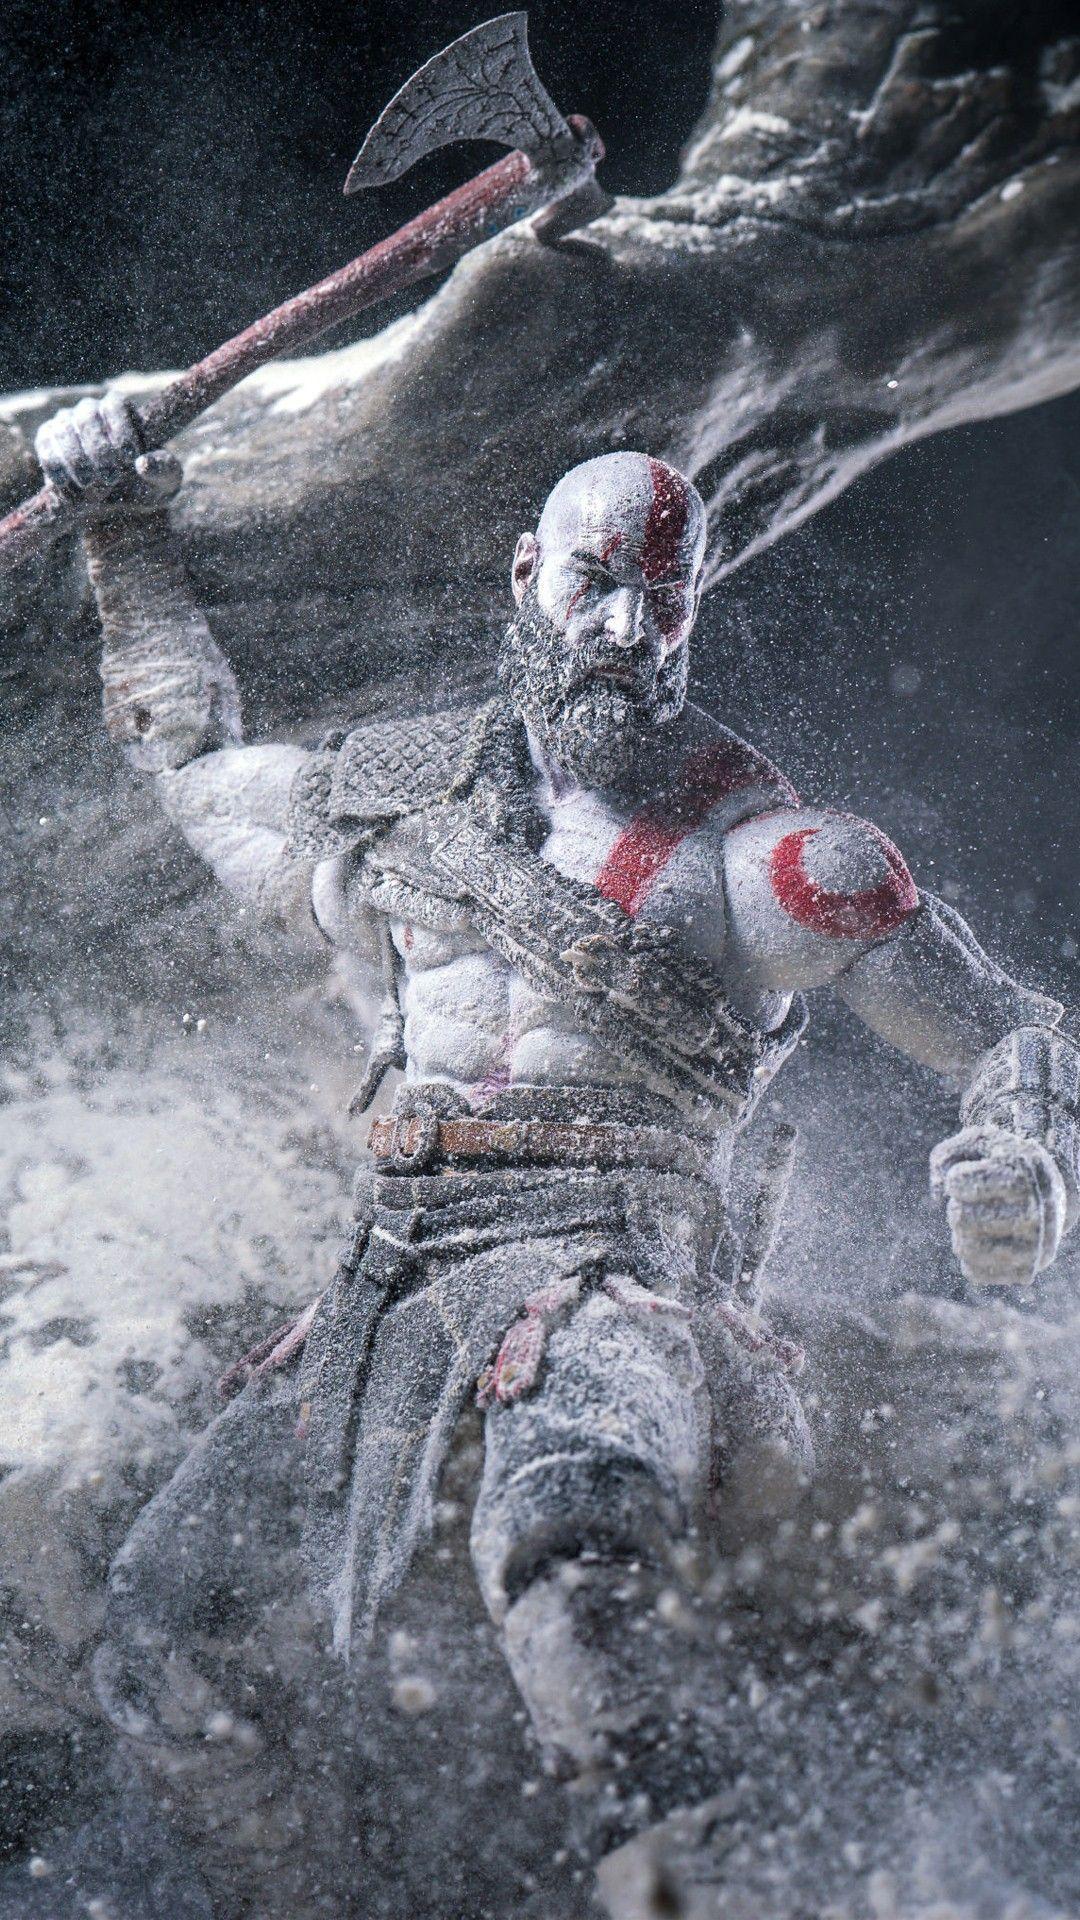 God Of War Android Wallpapers  Wallpaper Cave